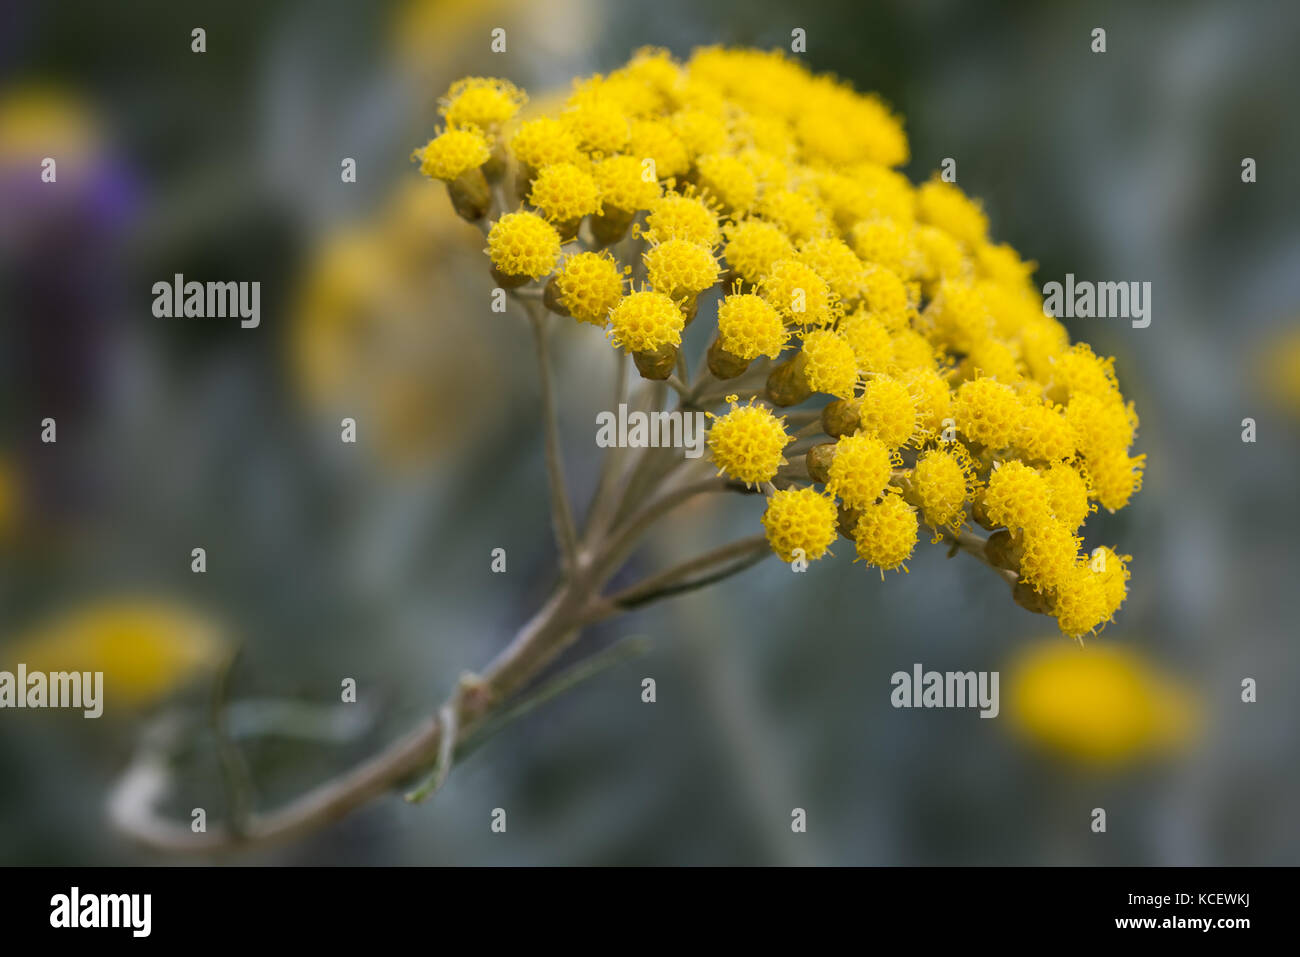 helichrysum flowers on a blurred background Stock Photo